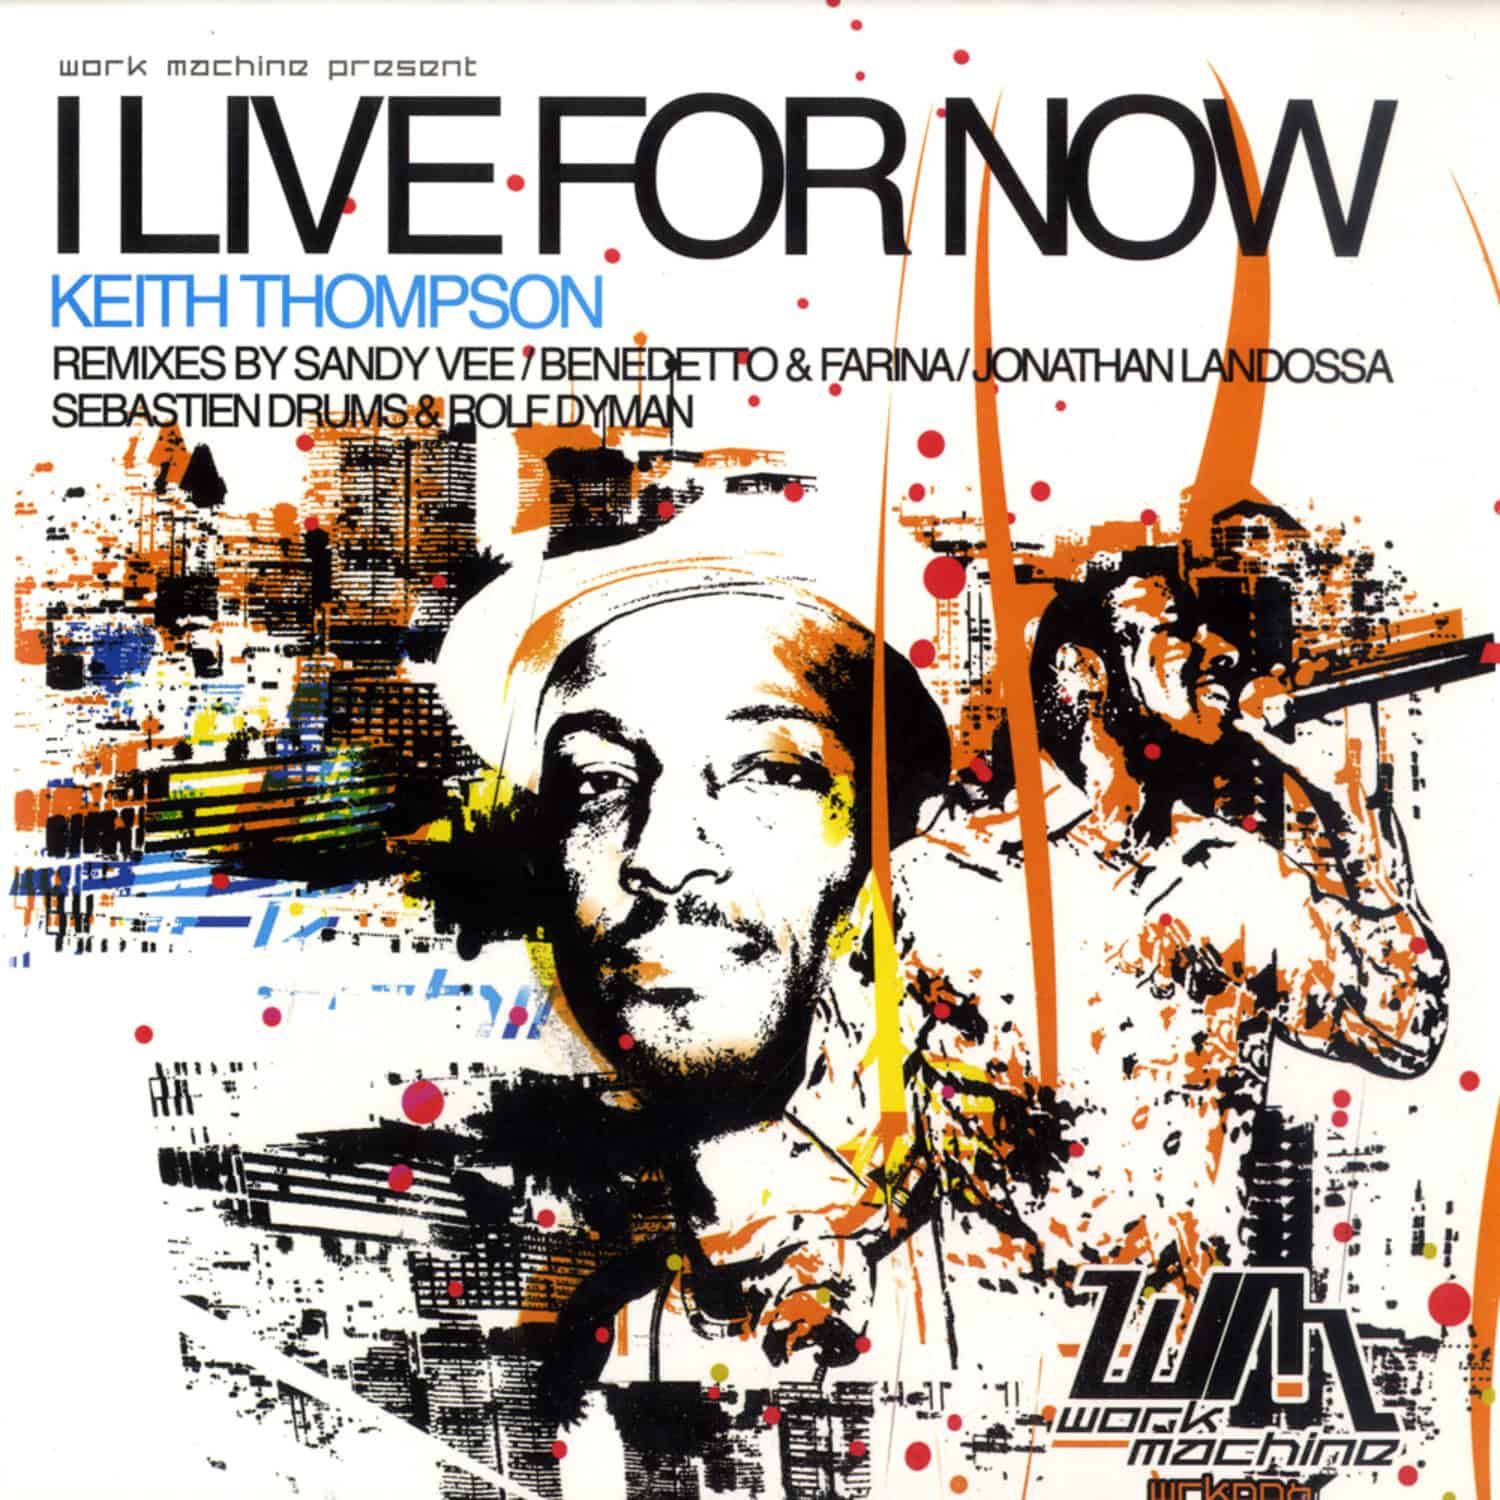 Keith Thompson - I LIVE FOR NOW 